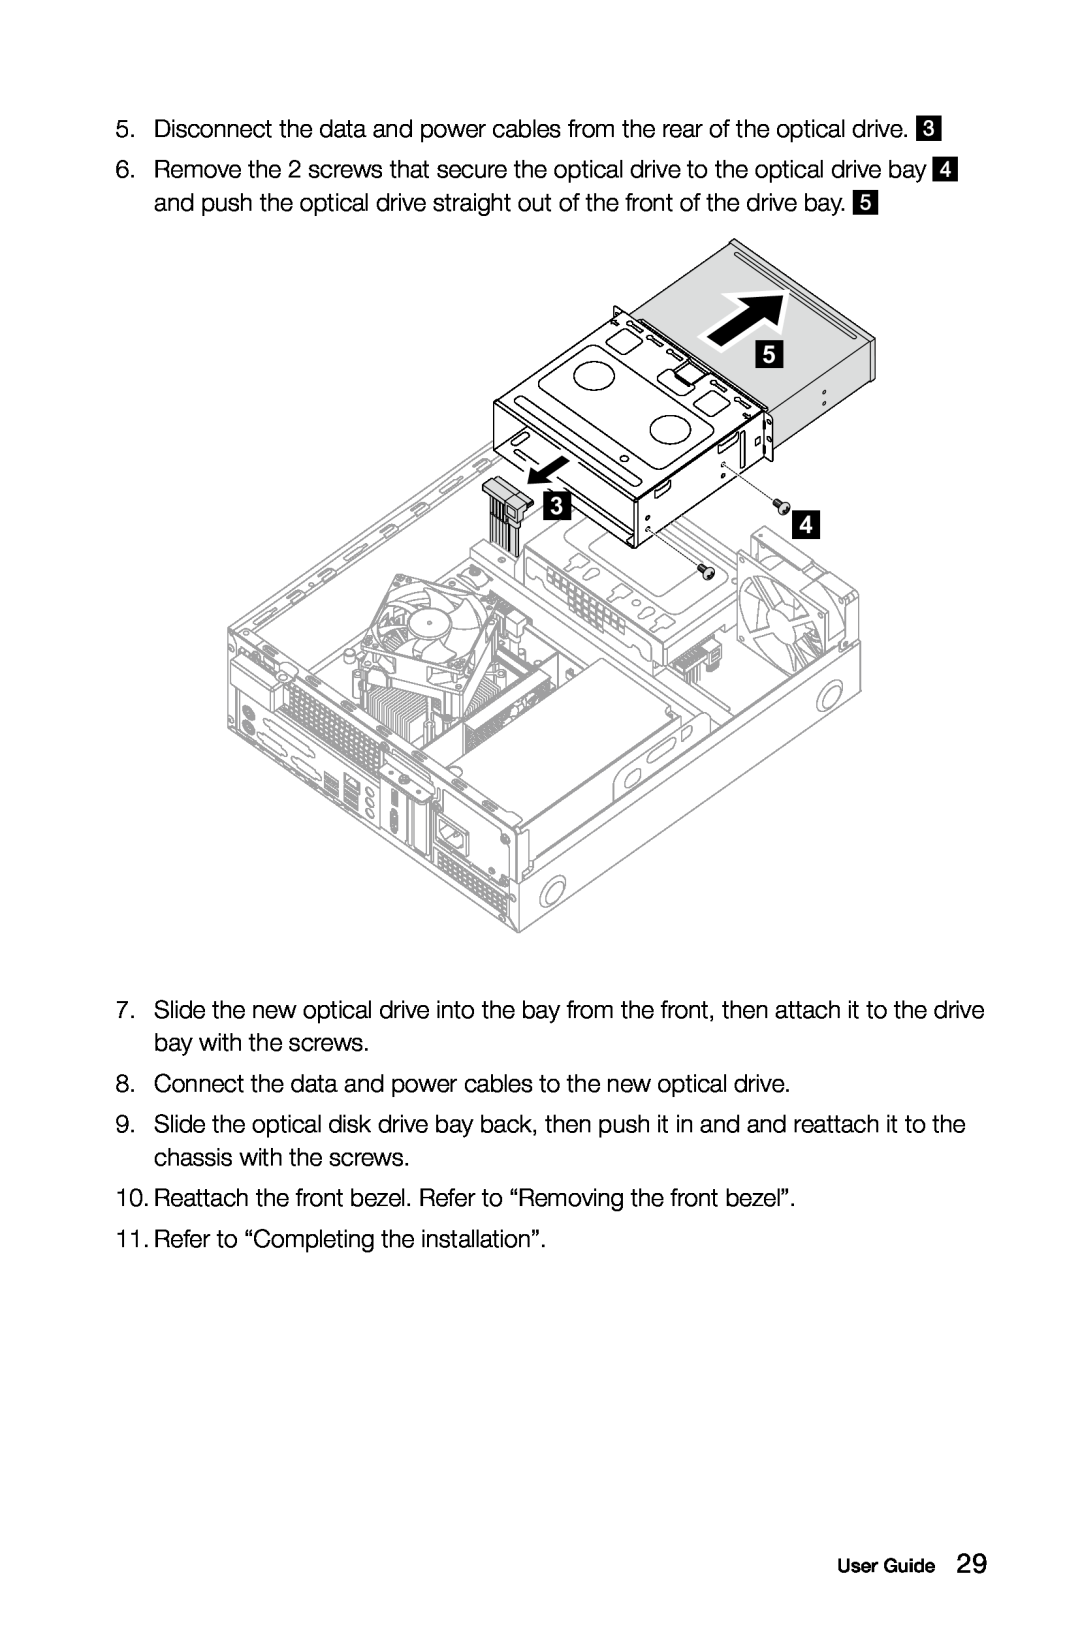 Lenovo H5S manual Refer to “Completing the installation” 